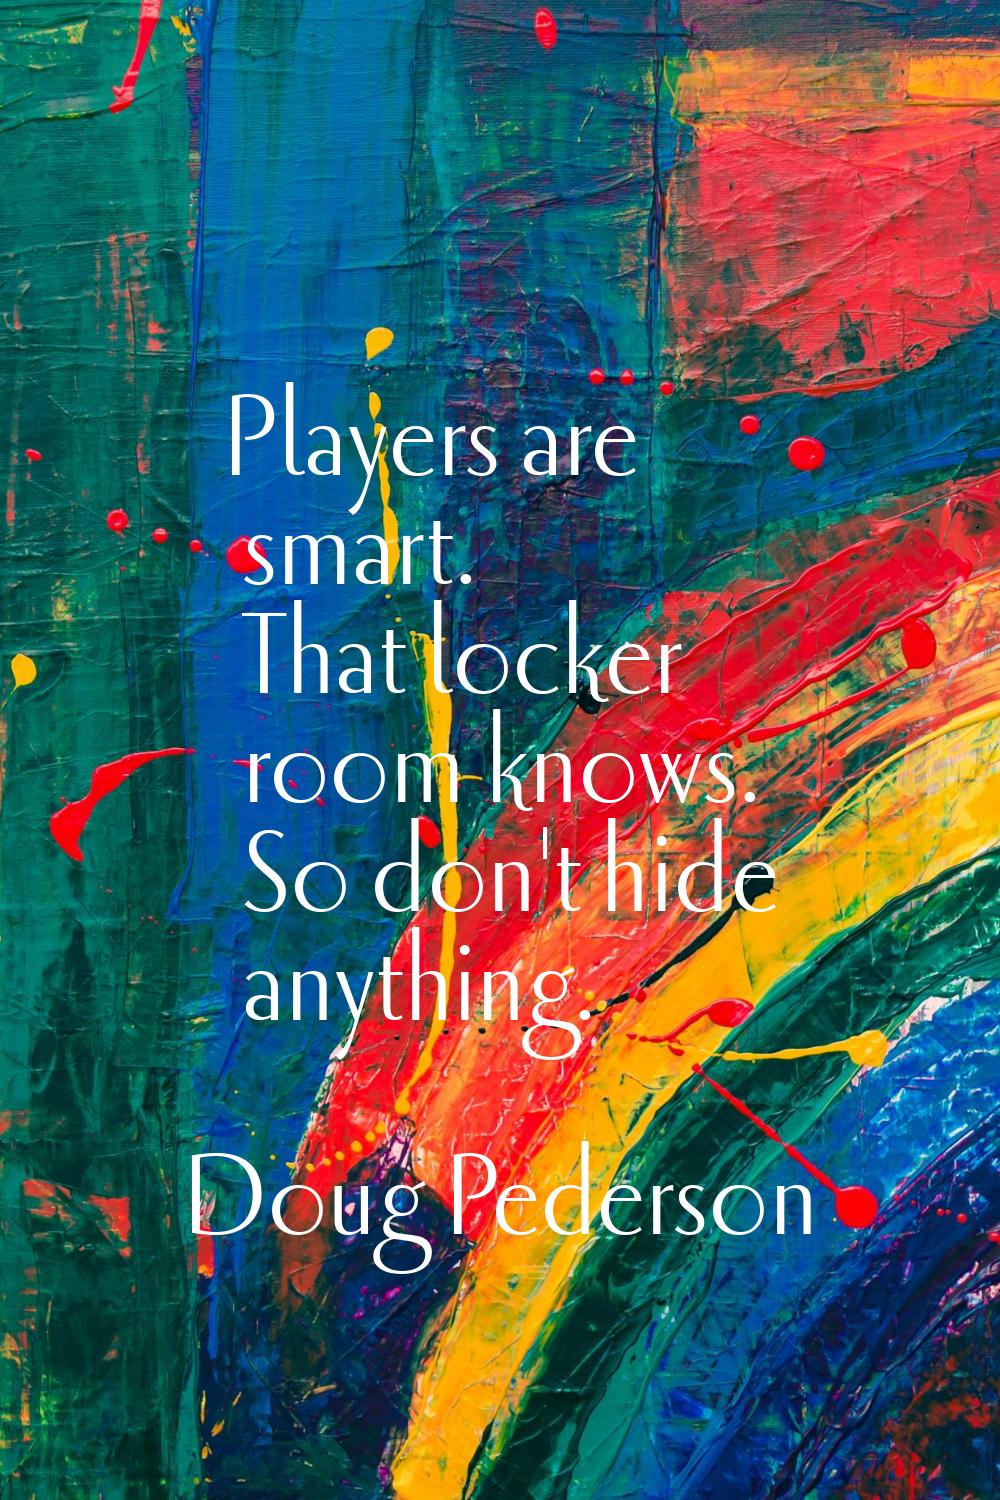 Players are smart. That locker room knows. So don't hide anything.